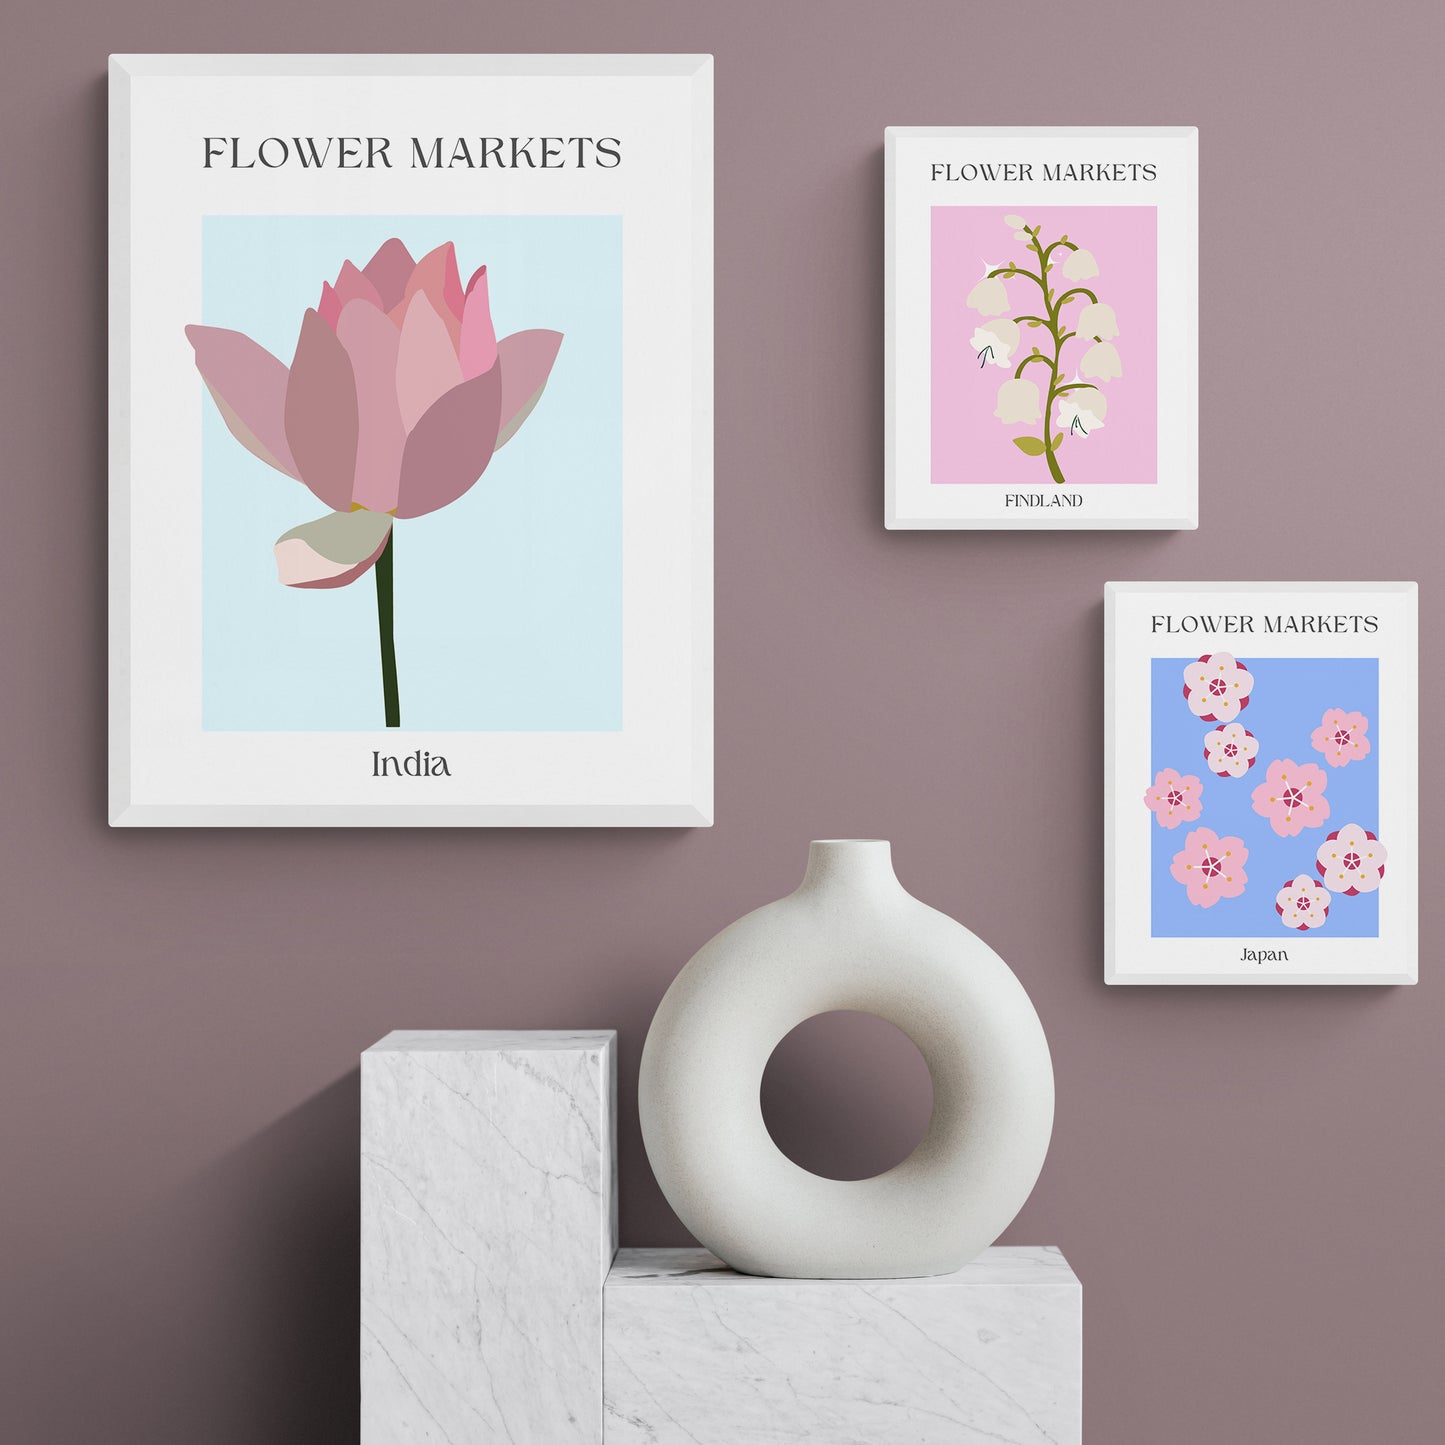 Breathe life into your walls with the Slovakia Flowers Market Print! Inspired by the art of Matisse and Danish pastel rooms, this poster features colorful floral drawings with shapes, forms, and curves. Enhance any room with vibrant gallery wall inspiration and create a lasting impression.